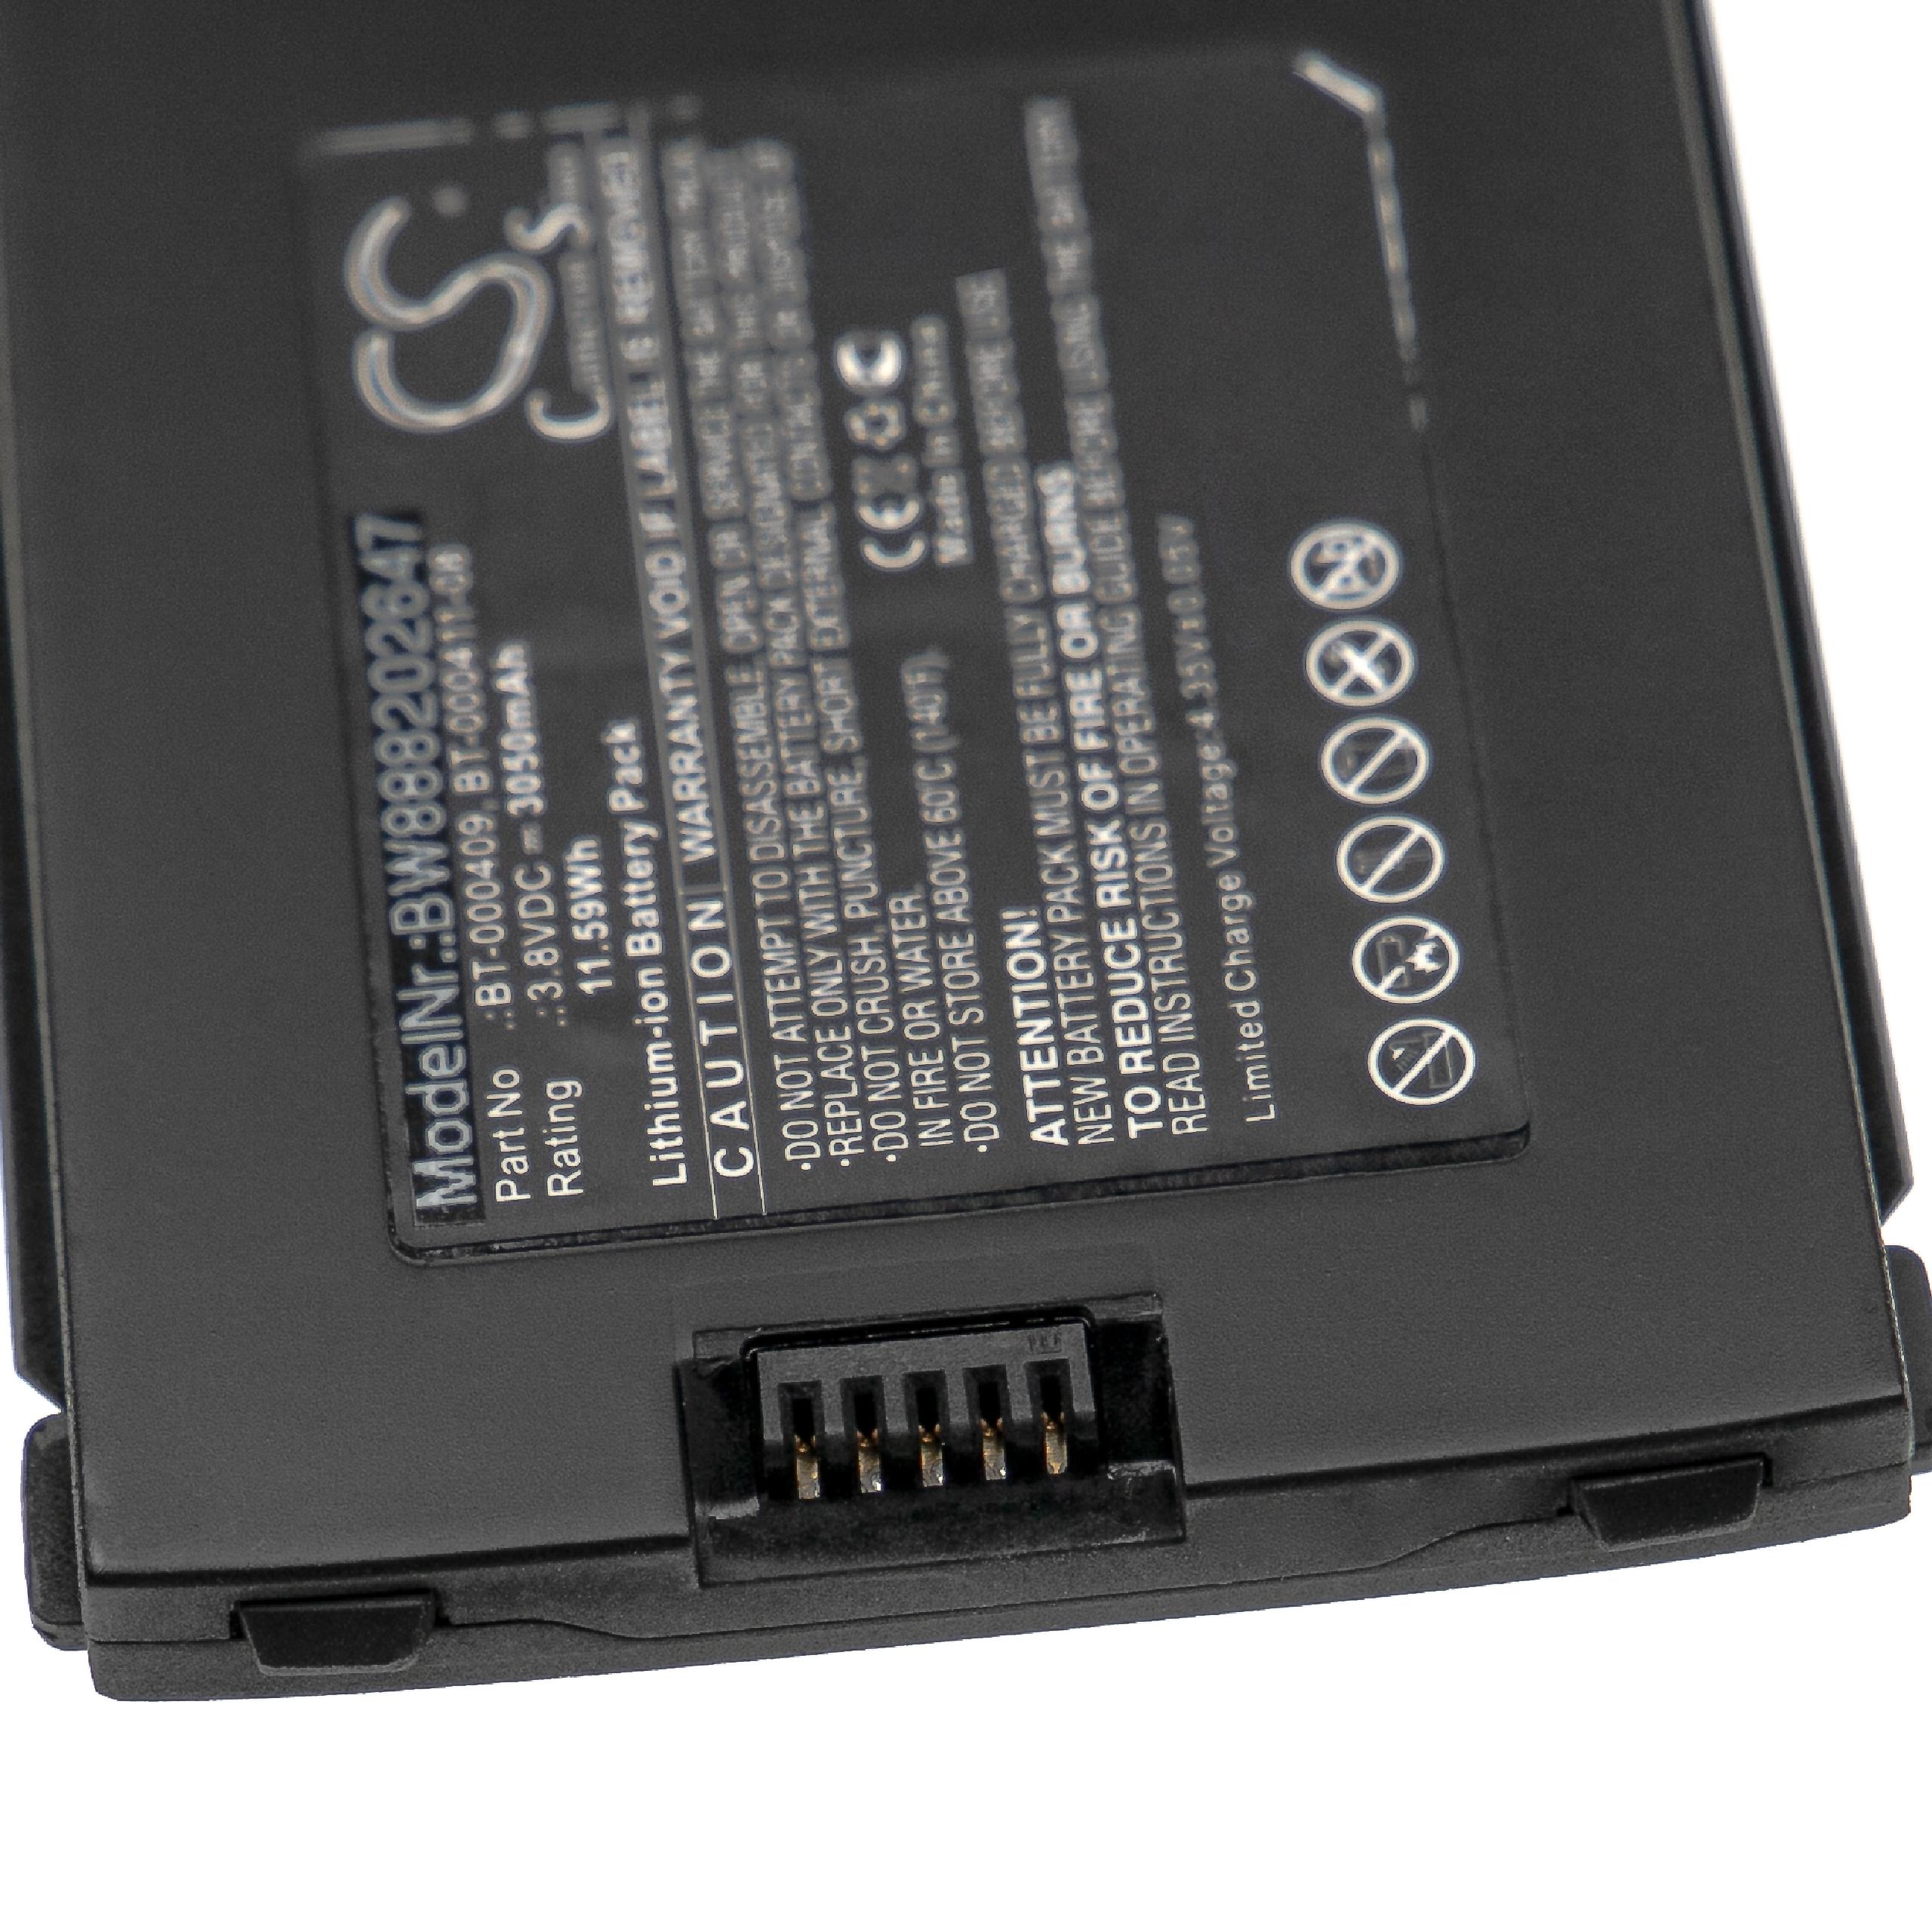 Handheld Computer Battery Replacement for Zebra BT-000409, BTRY-TC2Y-1XMA1-01, BT-000411-08 - 3050mAh, 3.8V